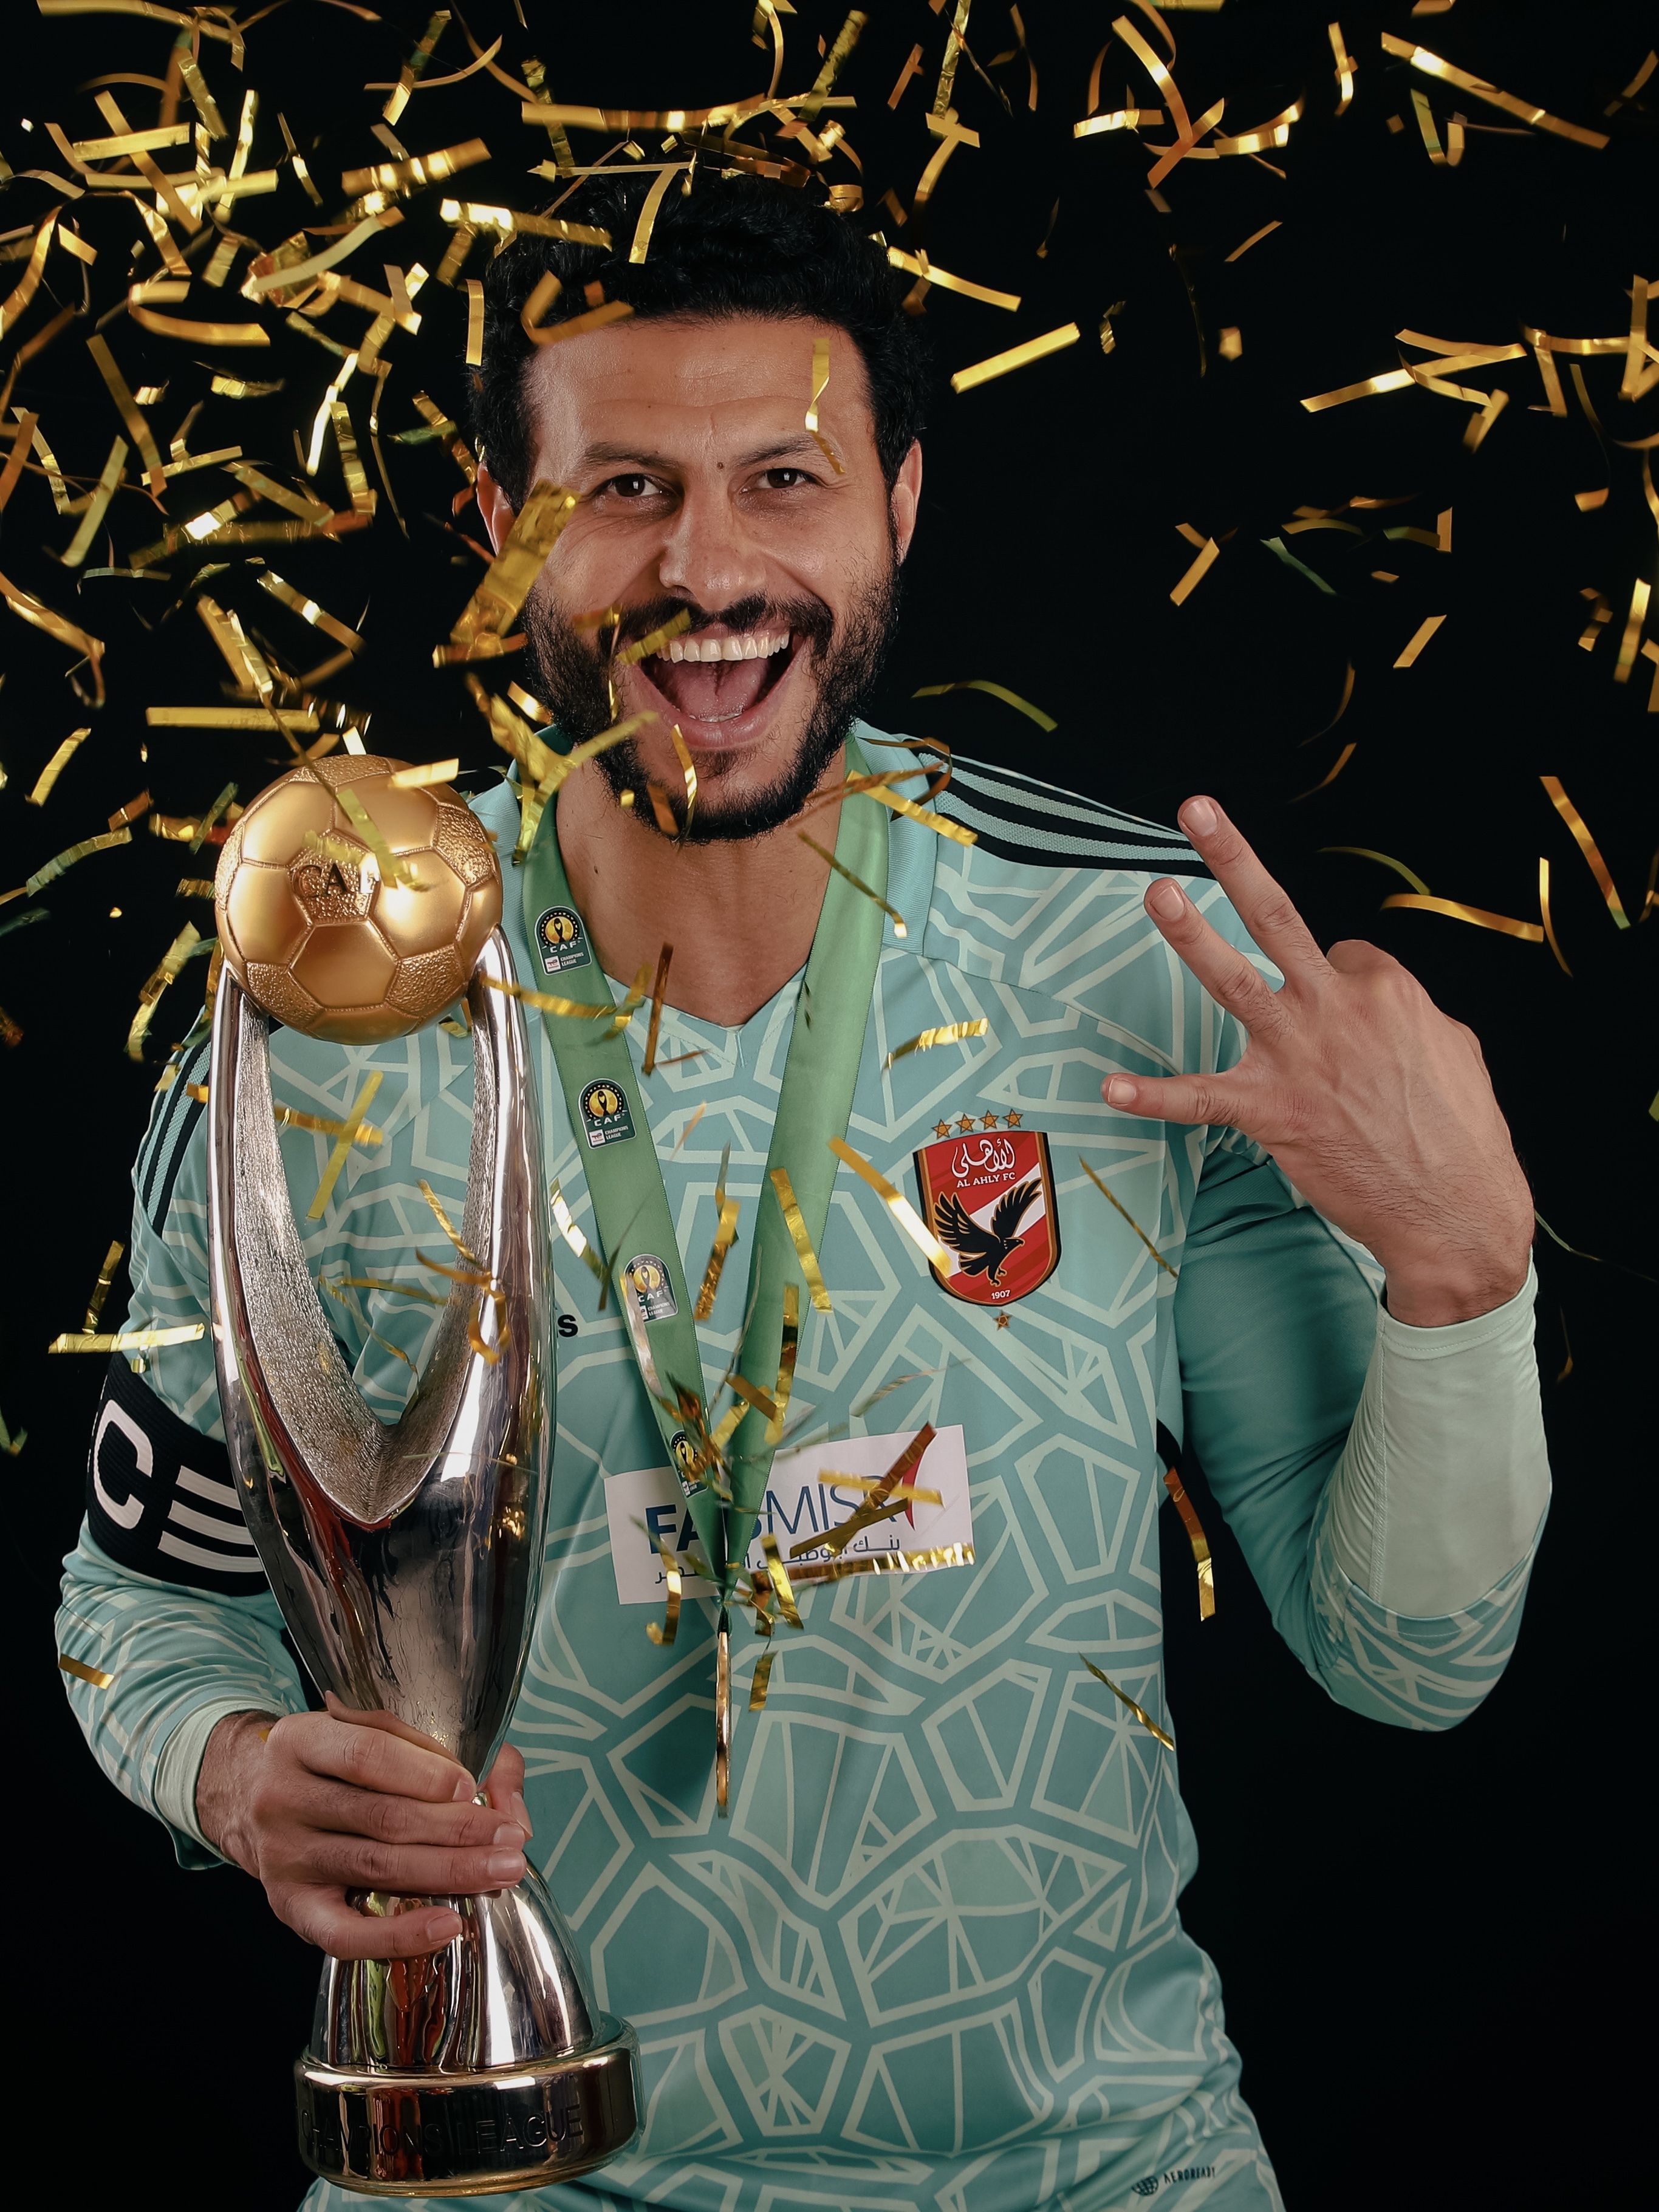 A memento from a momentous occasion. 🎞️ #ClubWC #AlAhly #ElShenawy, Al  Ahly SC